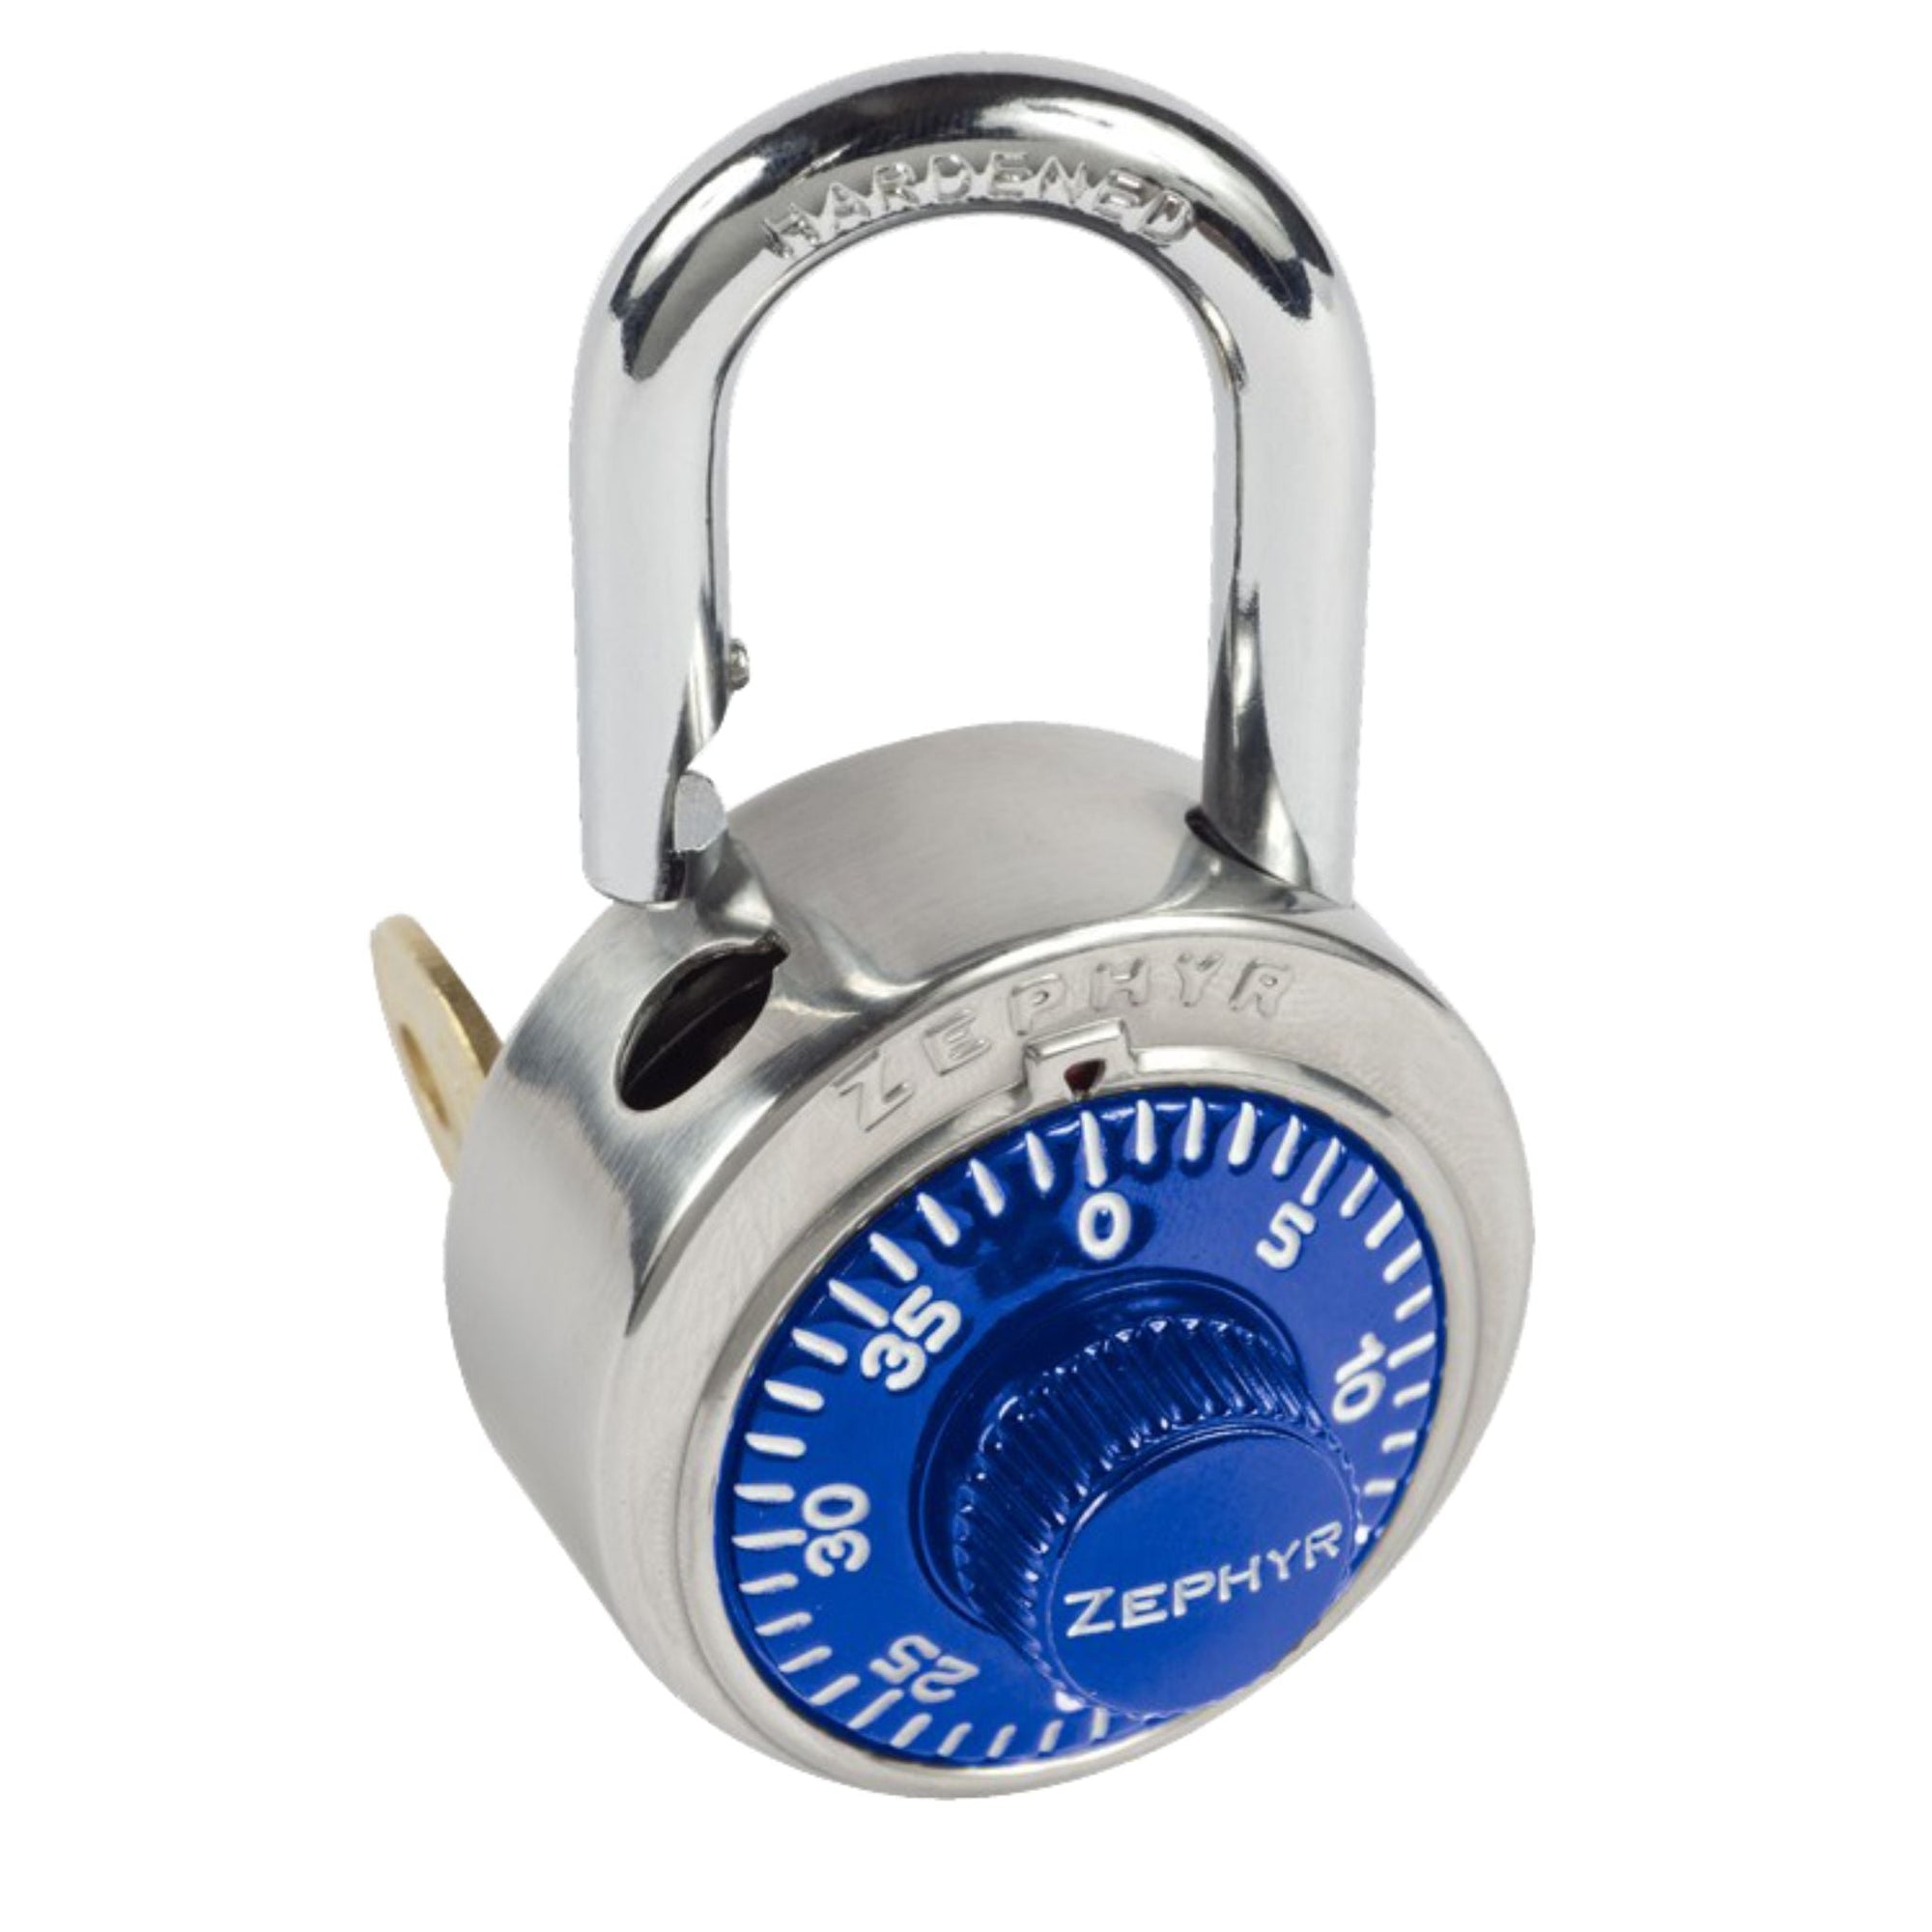 Zephyr Lock 1925BLU Locker Locks Feature 3-Digit Dialing (Blue Dial) With Control Key Override for Supervisory Access - The Lock Source